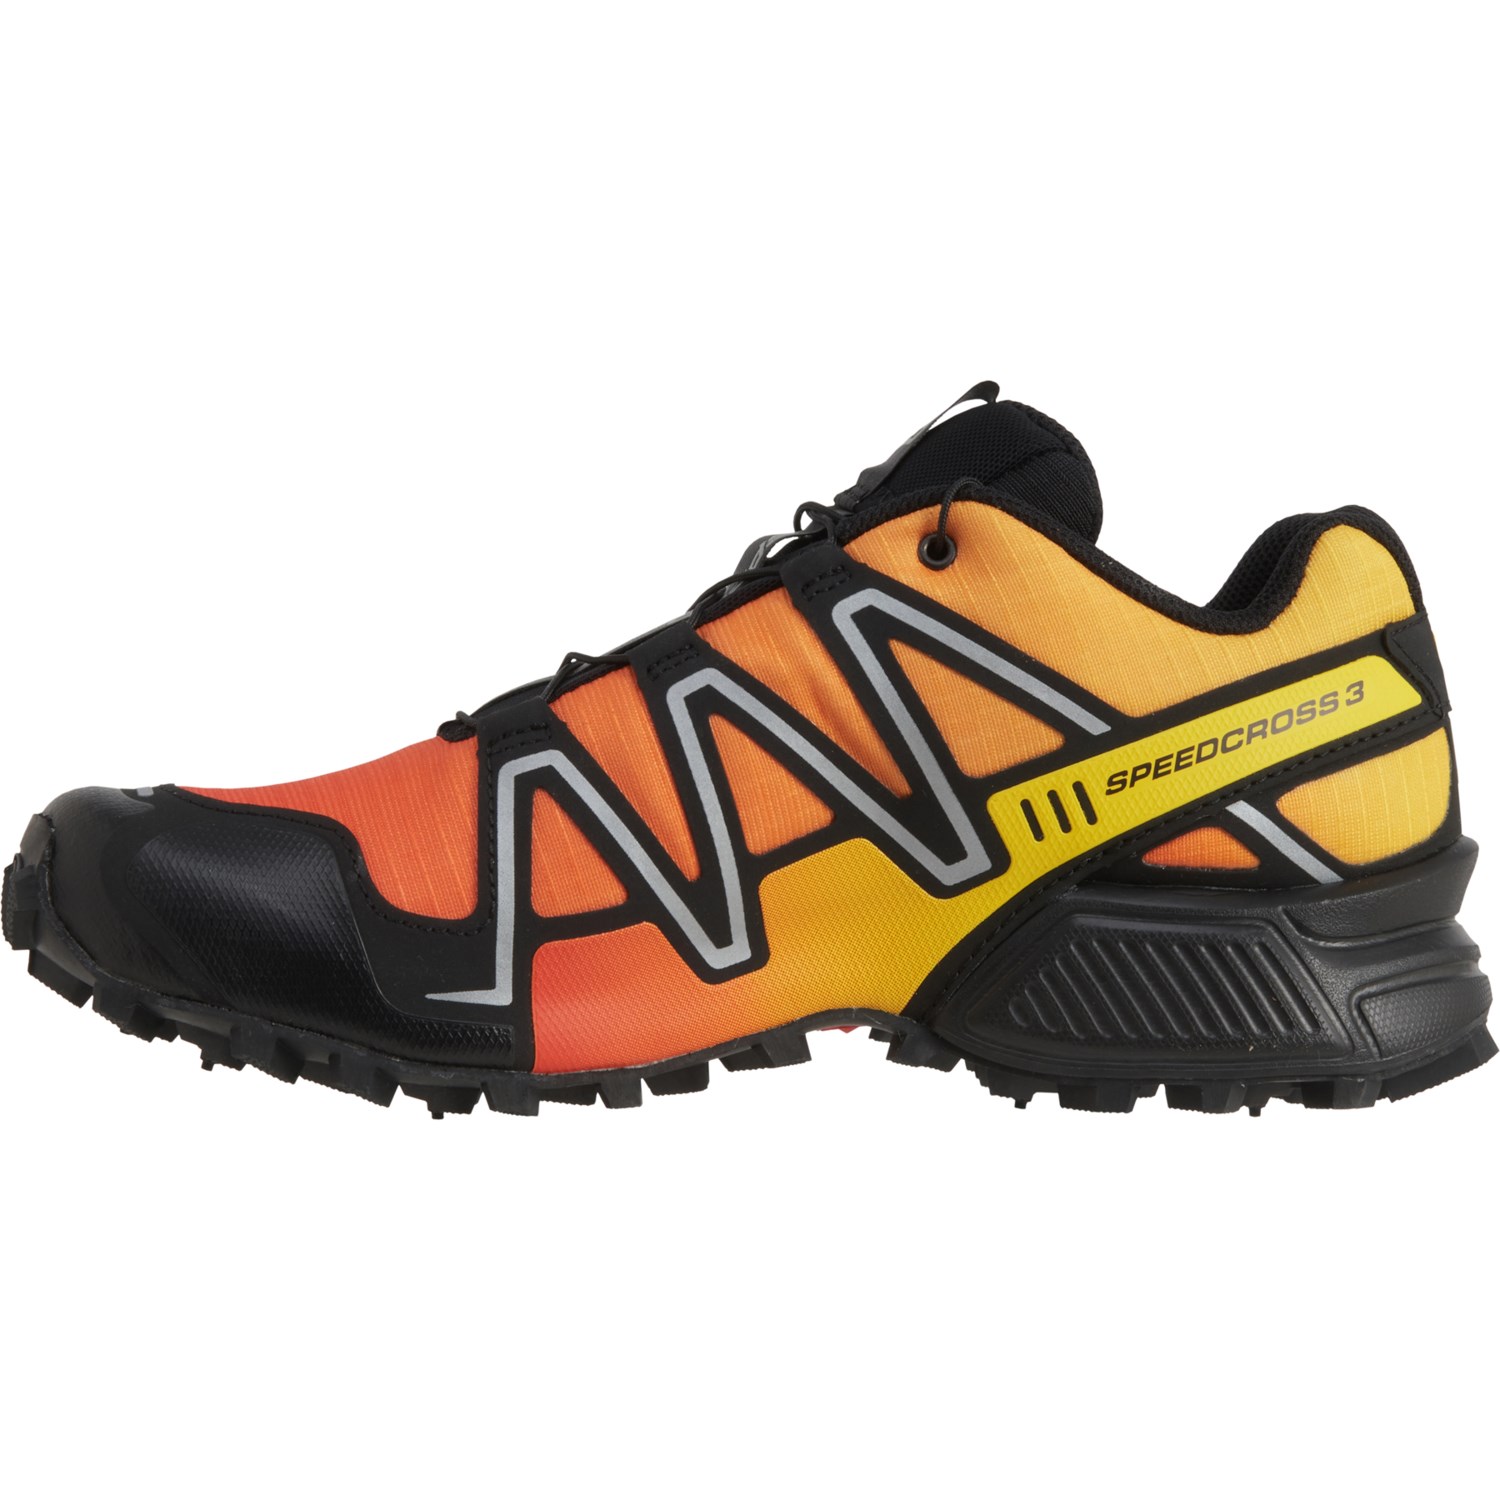 Speedcross 3 Gradient Trail Running Shoes (For Men and Women) Save 37%